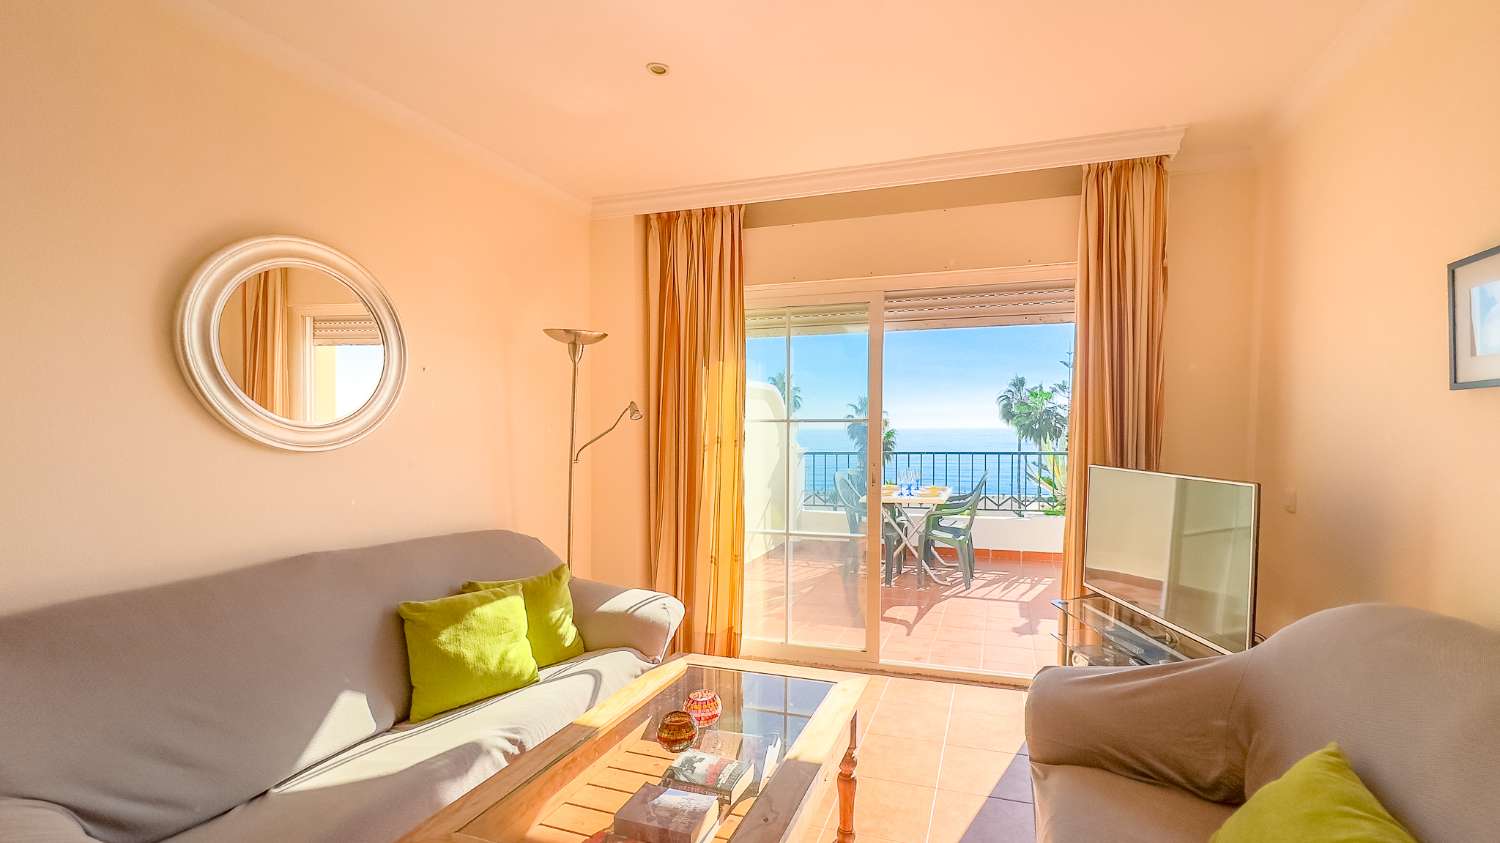 Penthouse for sale in Nerja, Burriana beach